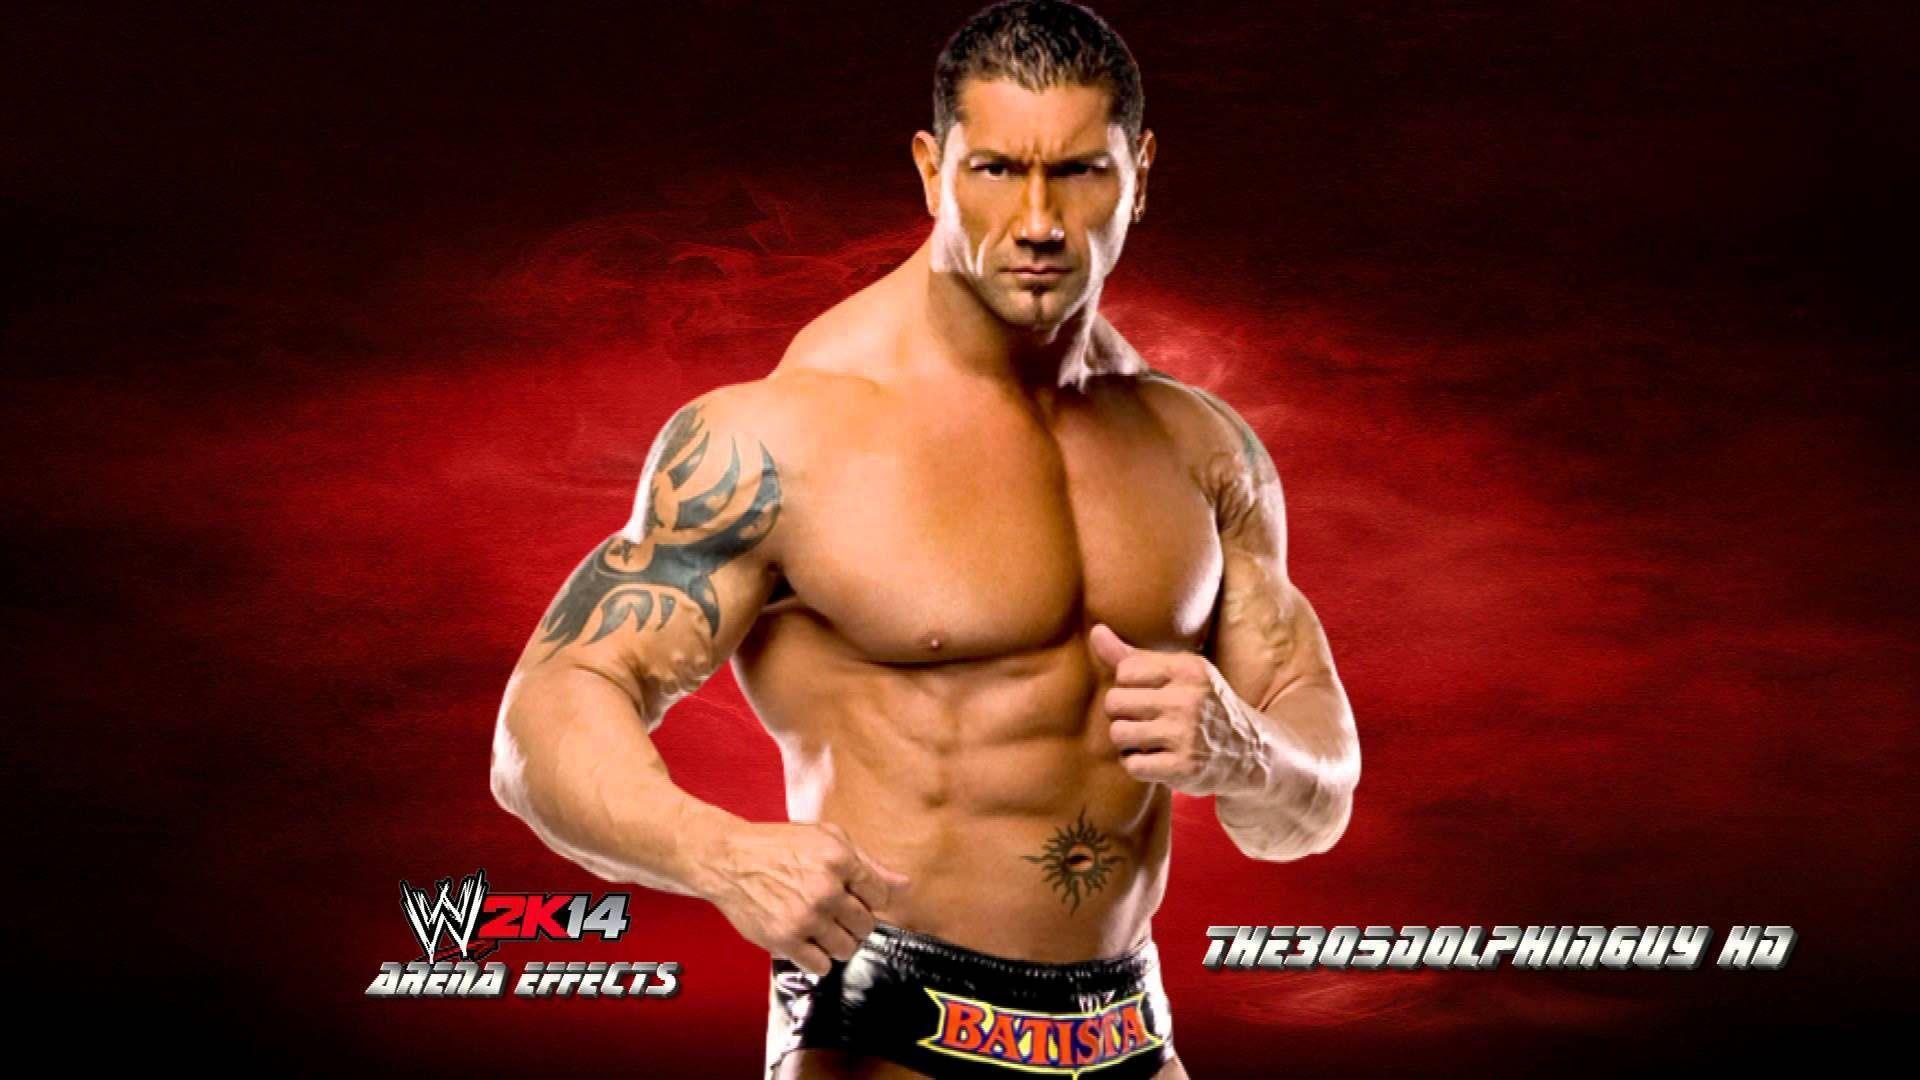 WWE Dave Batista Wallpapers - Daily Backgrounds in HD.